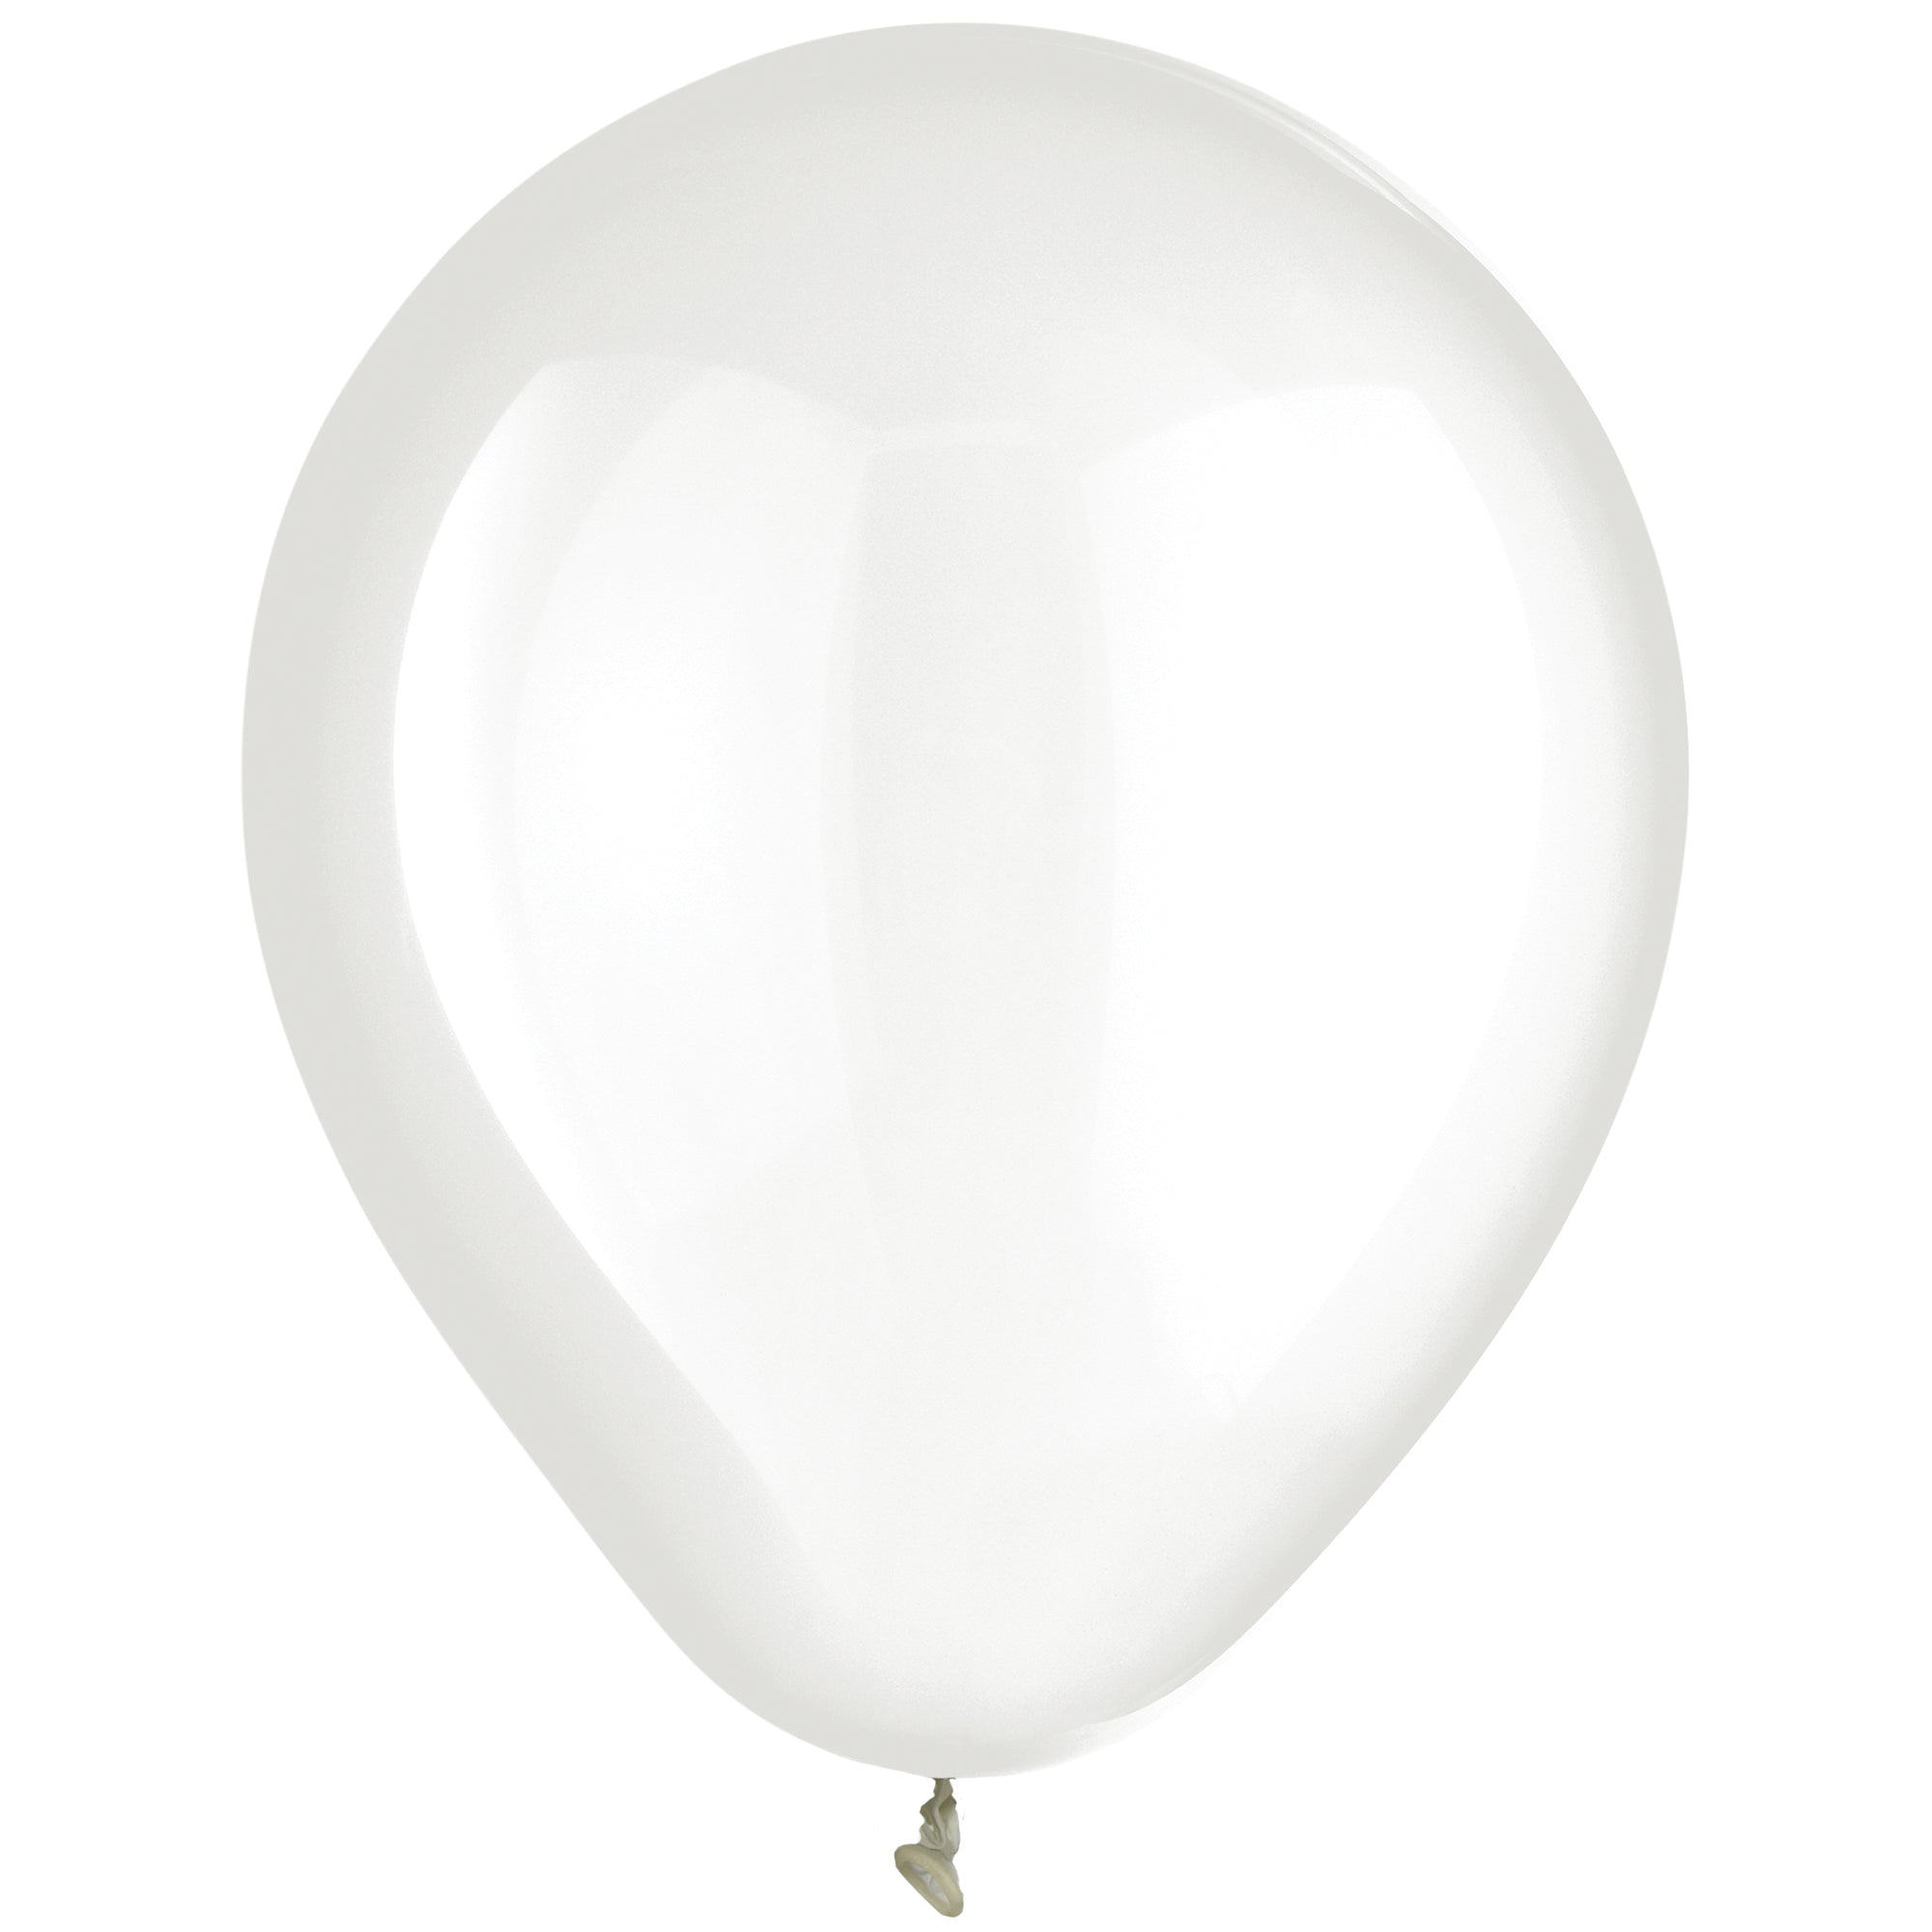 72 Latex Balloons  Clear  12in